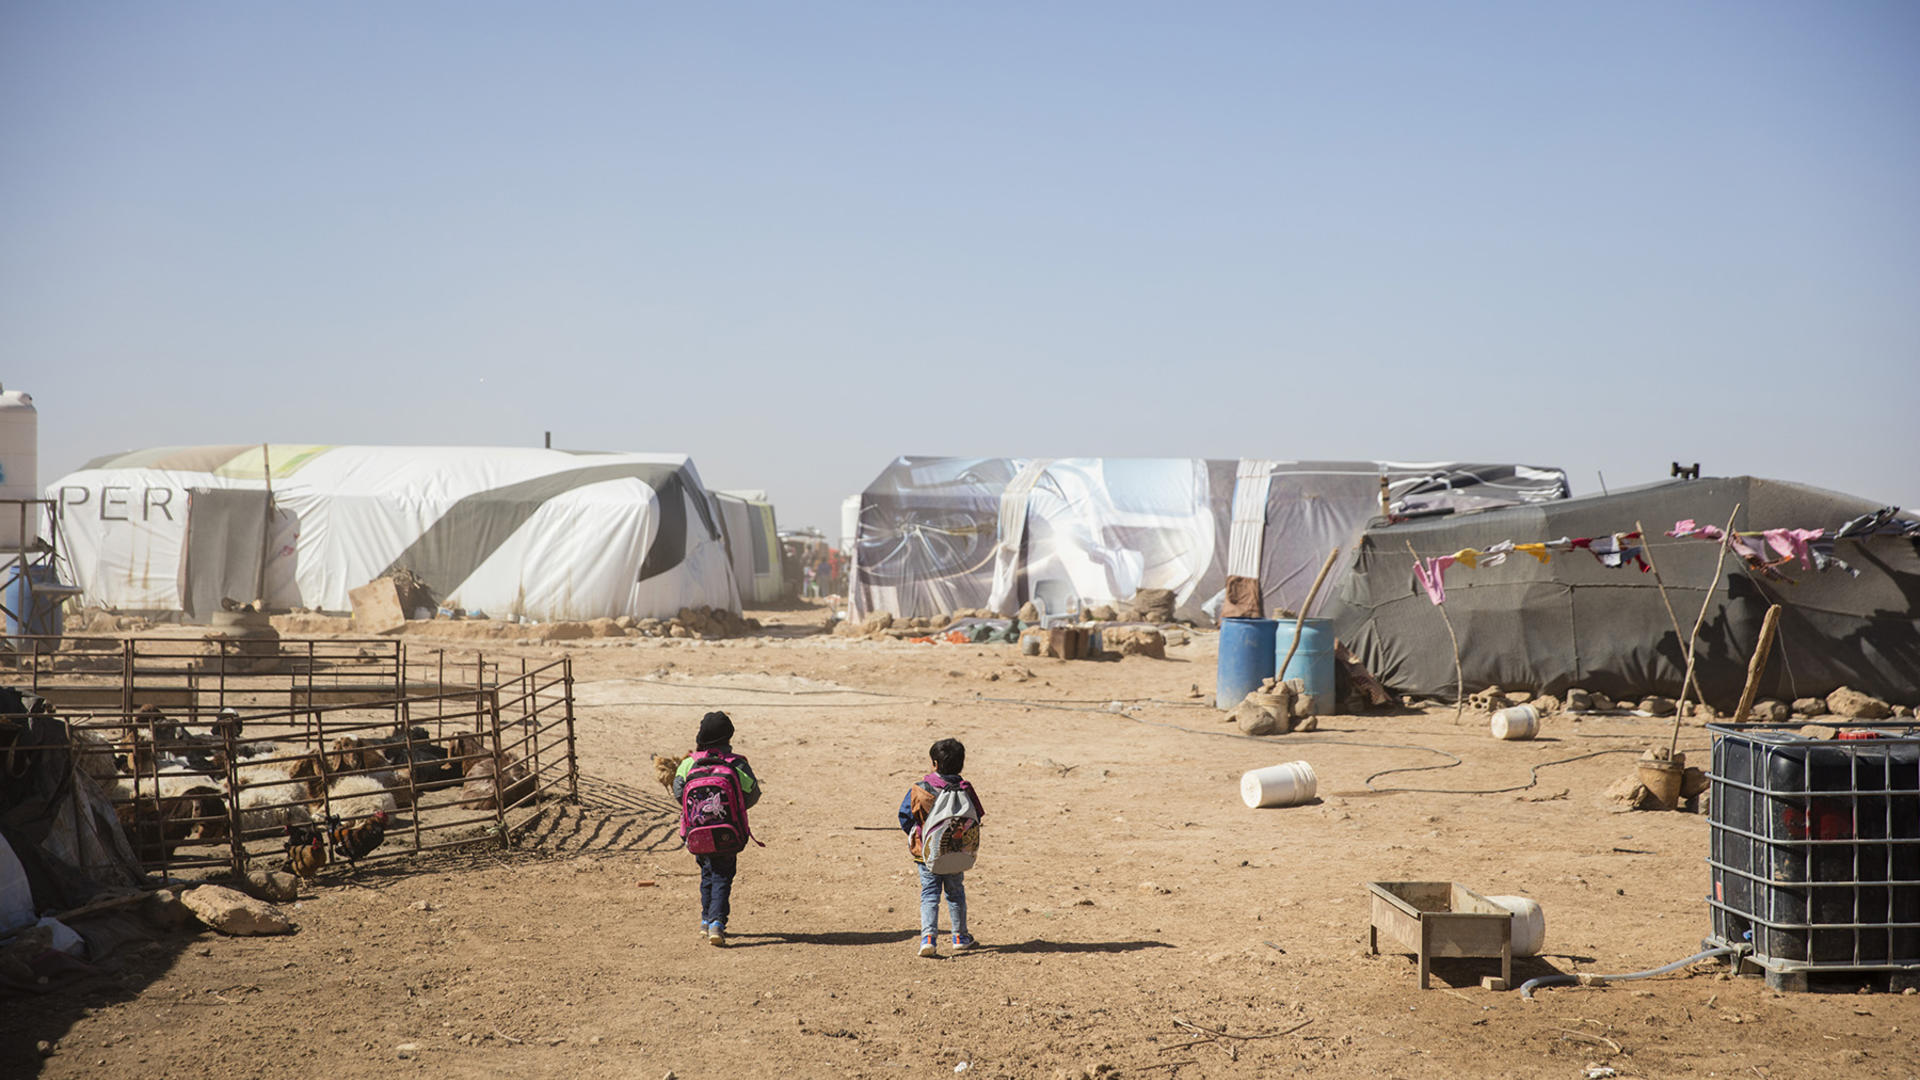 Syrian children walk through rows of tents in a refugee camp in Jordan